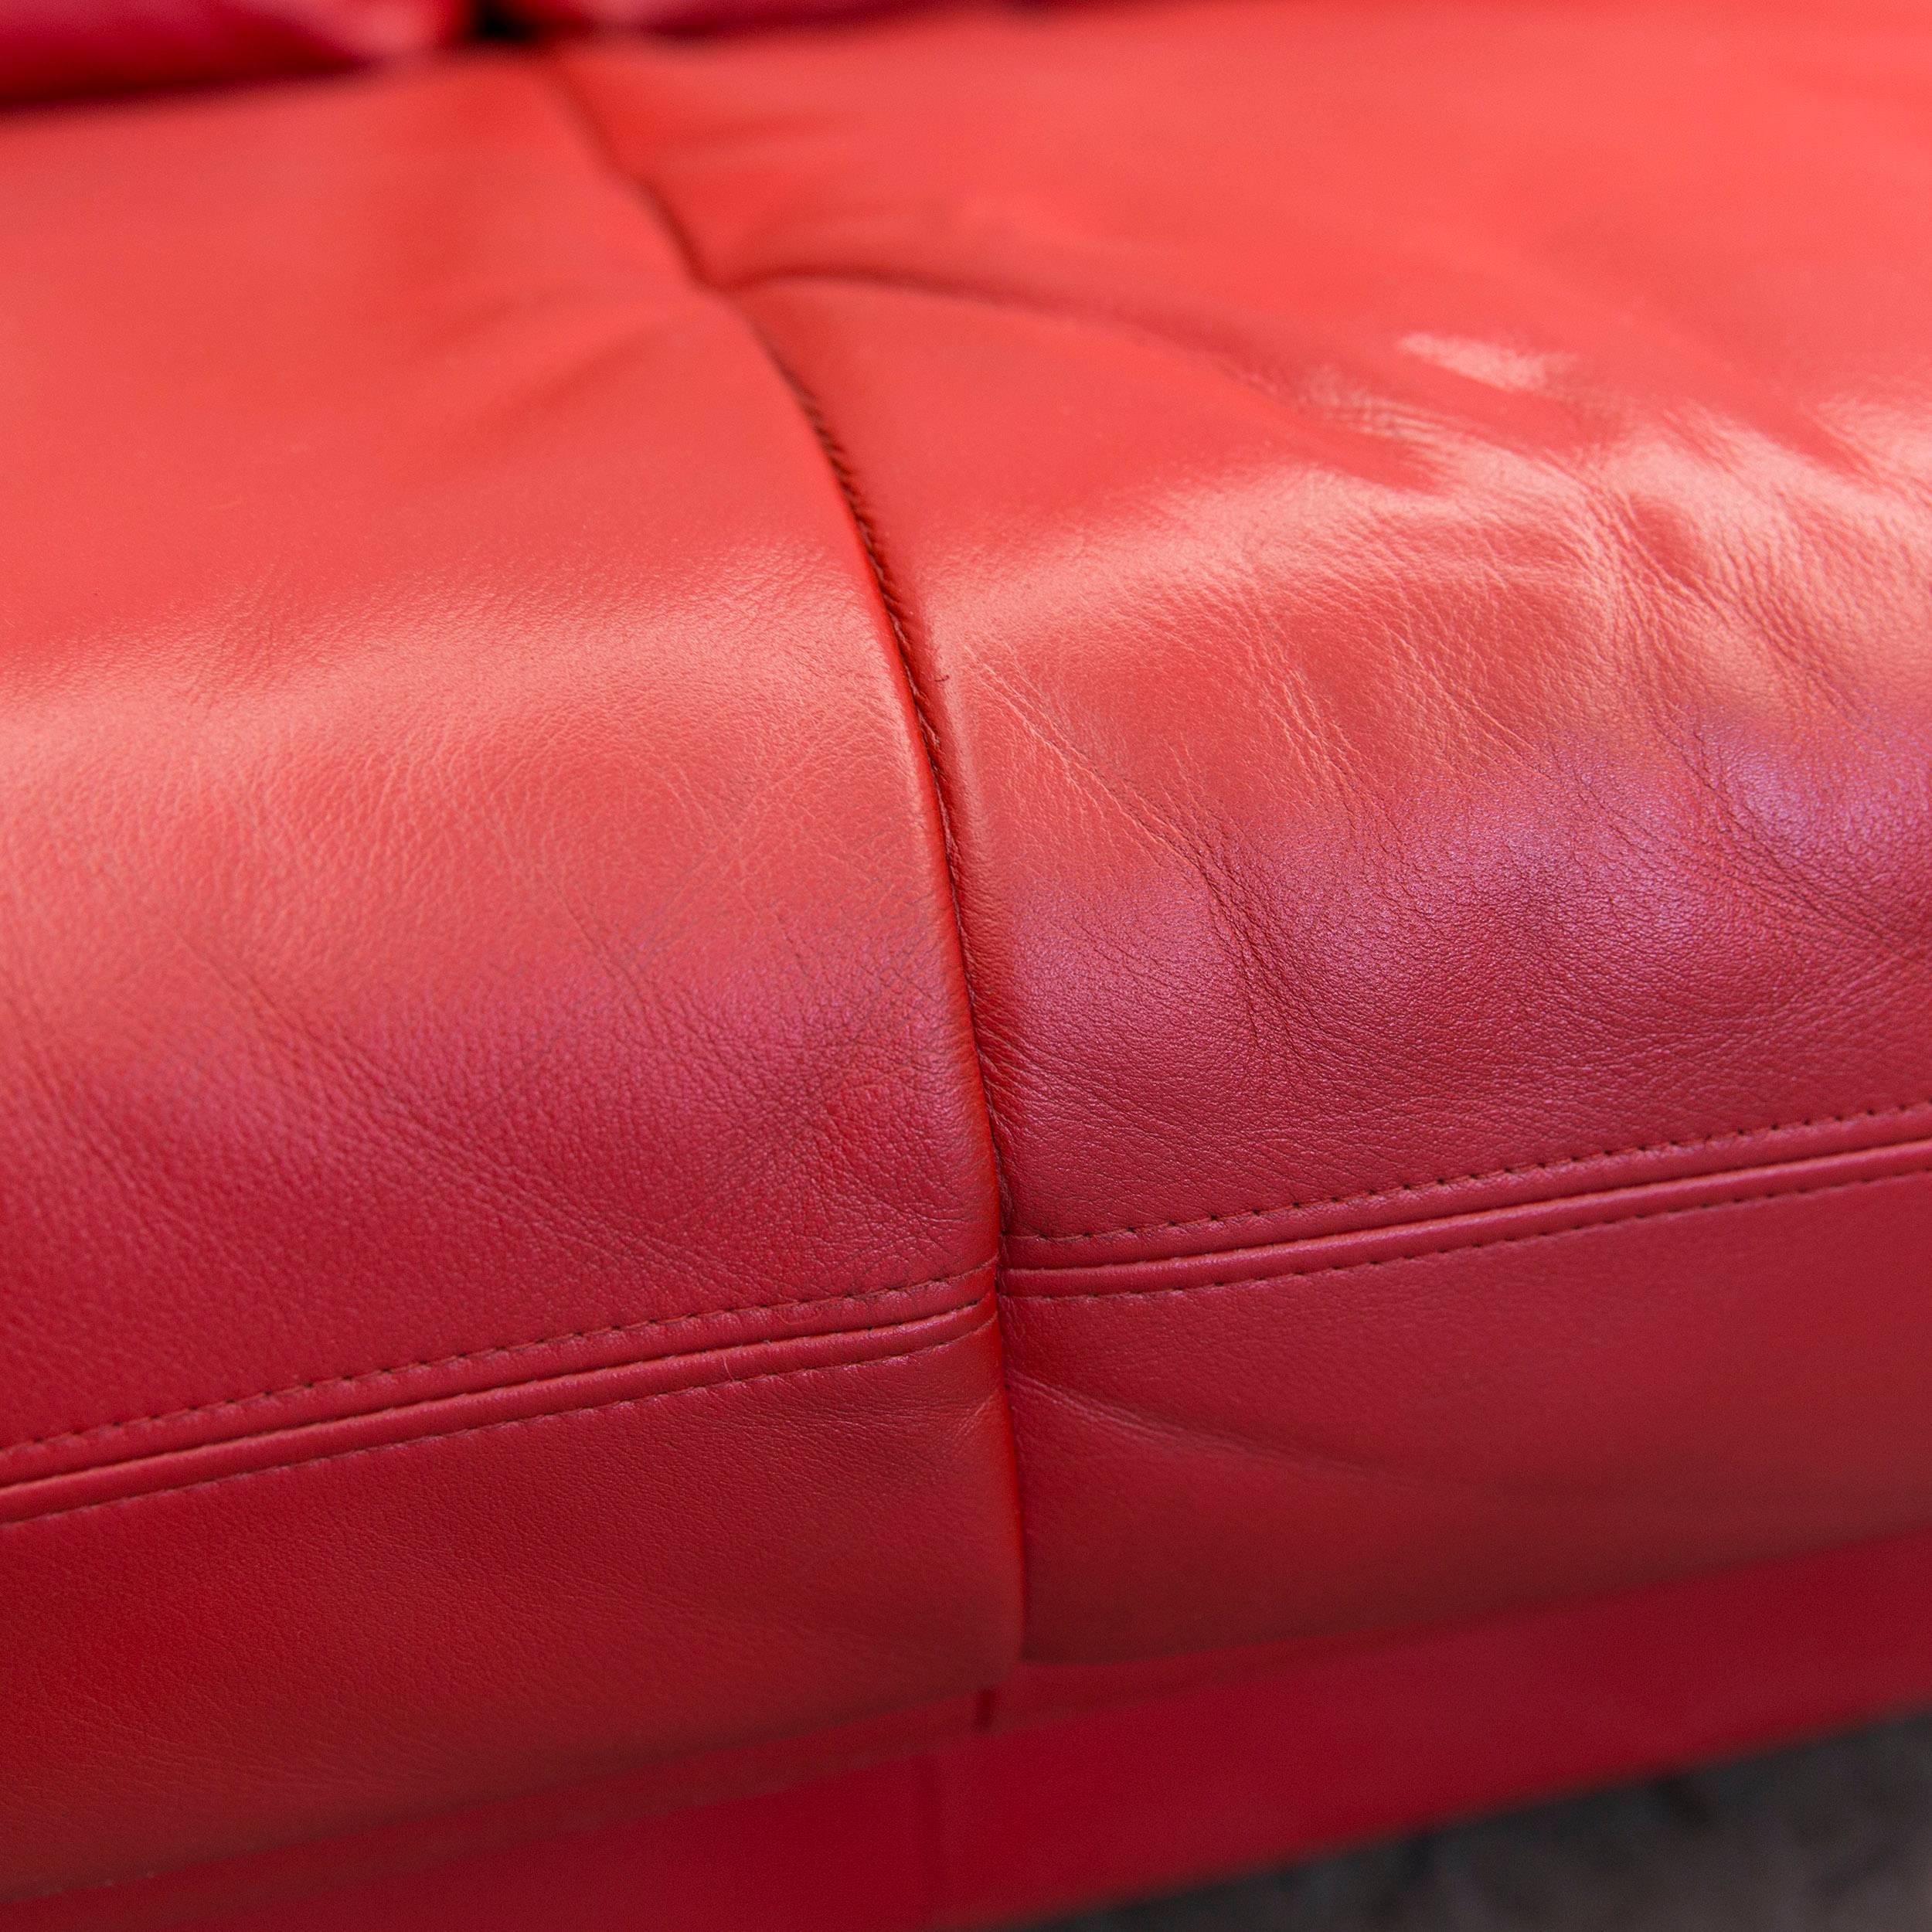 Authentic leather two-seat couch by Rolf Benz, made in Germany. Good condition with slight signs of use.